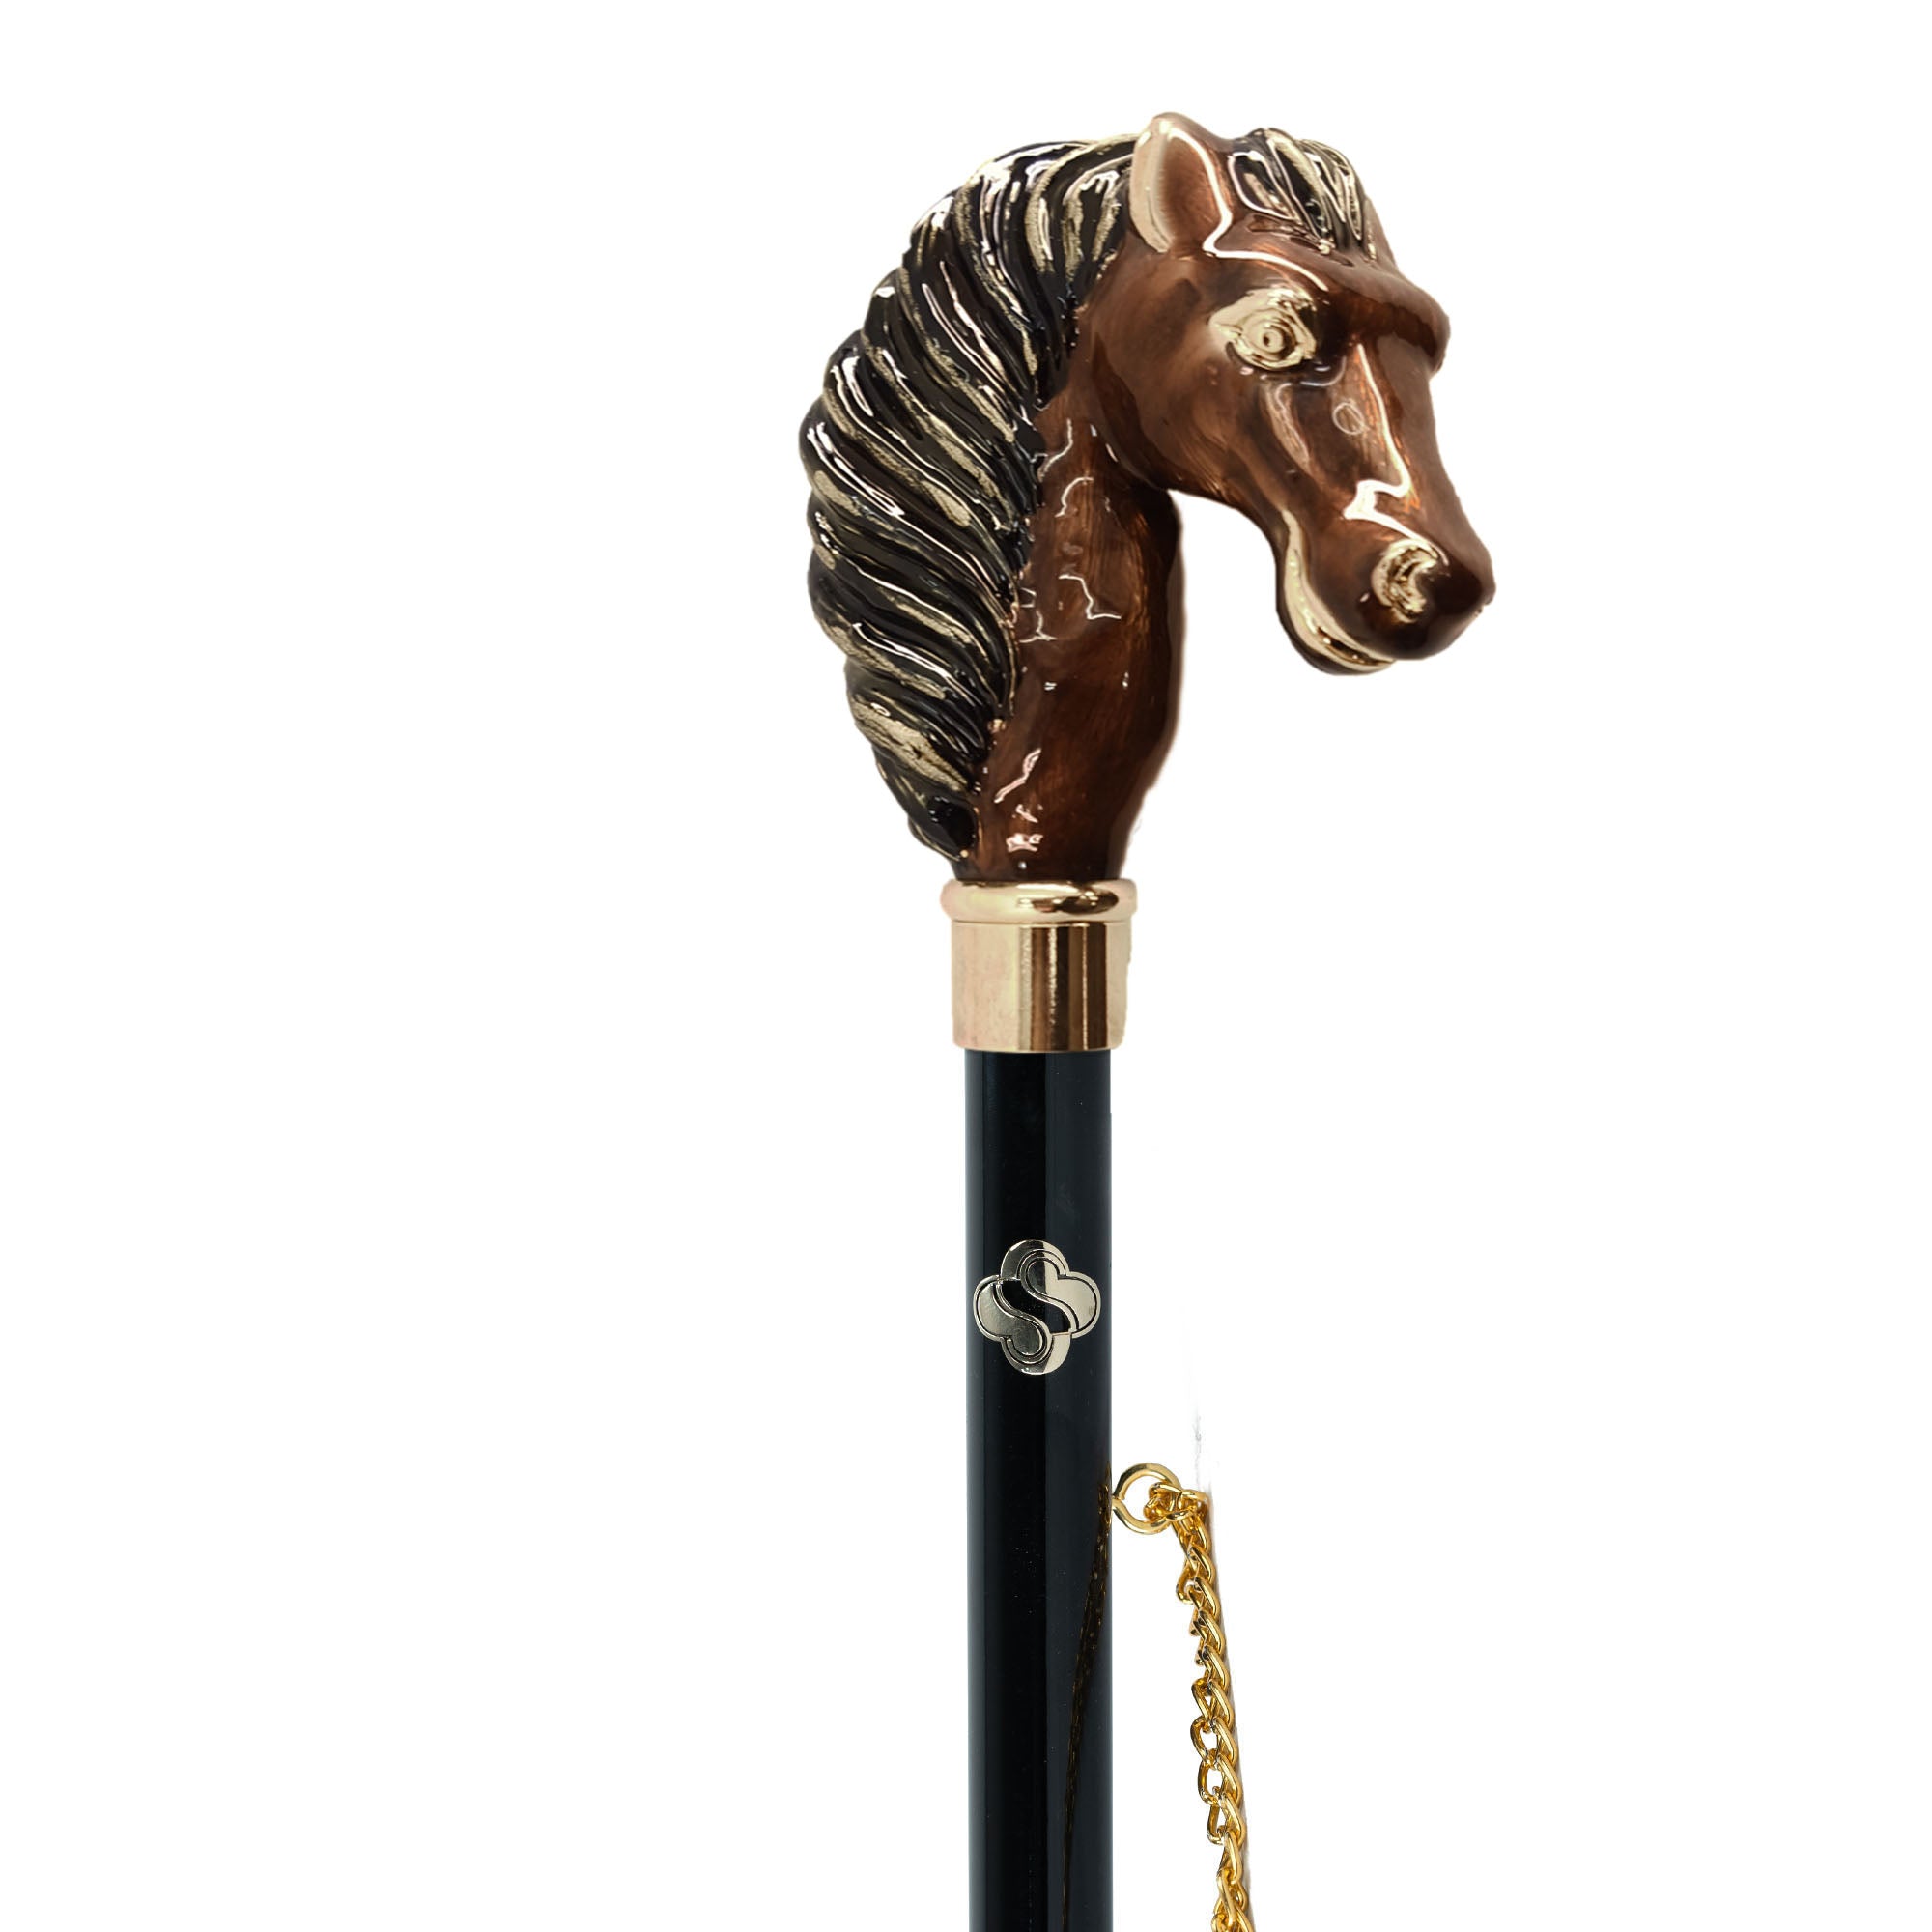 Horse Harmony: Hand-Painted 24K Gold-Plated Horse Shoehorn